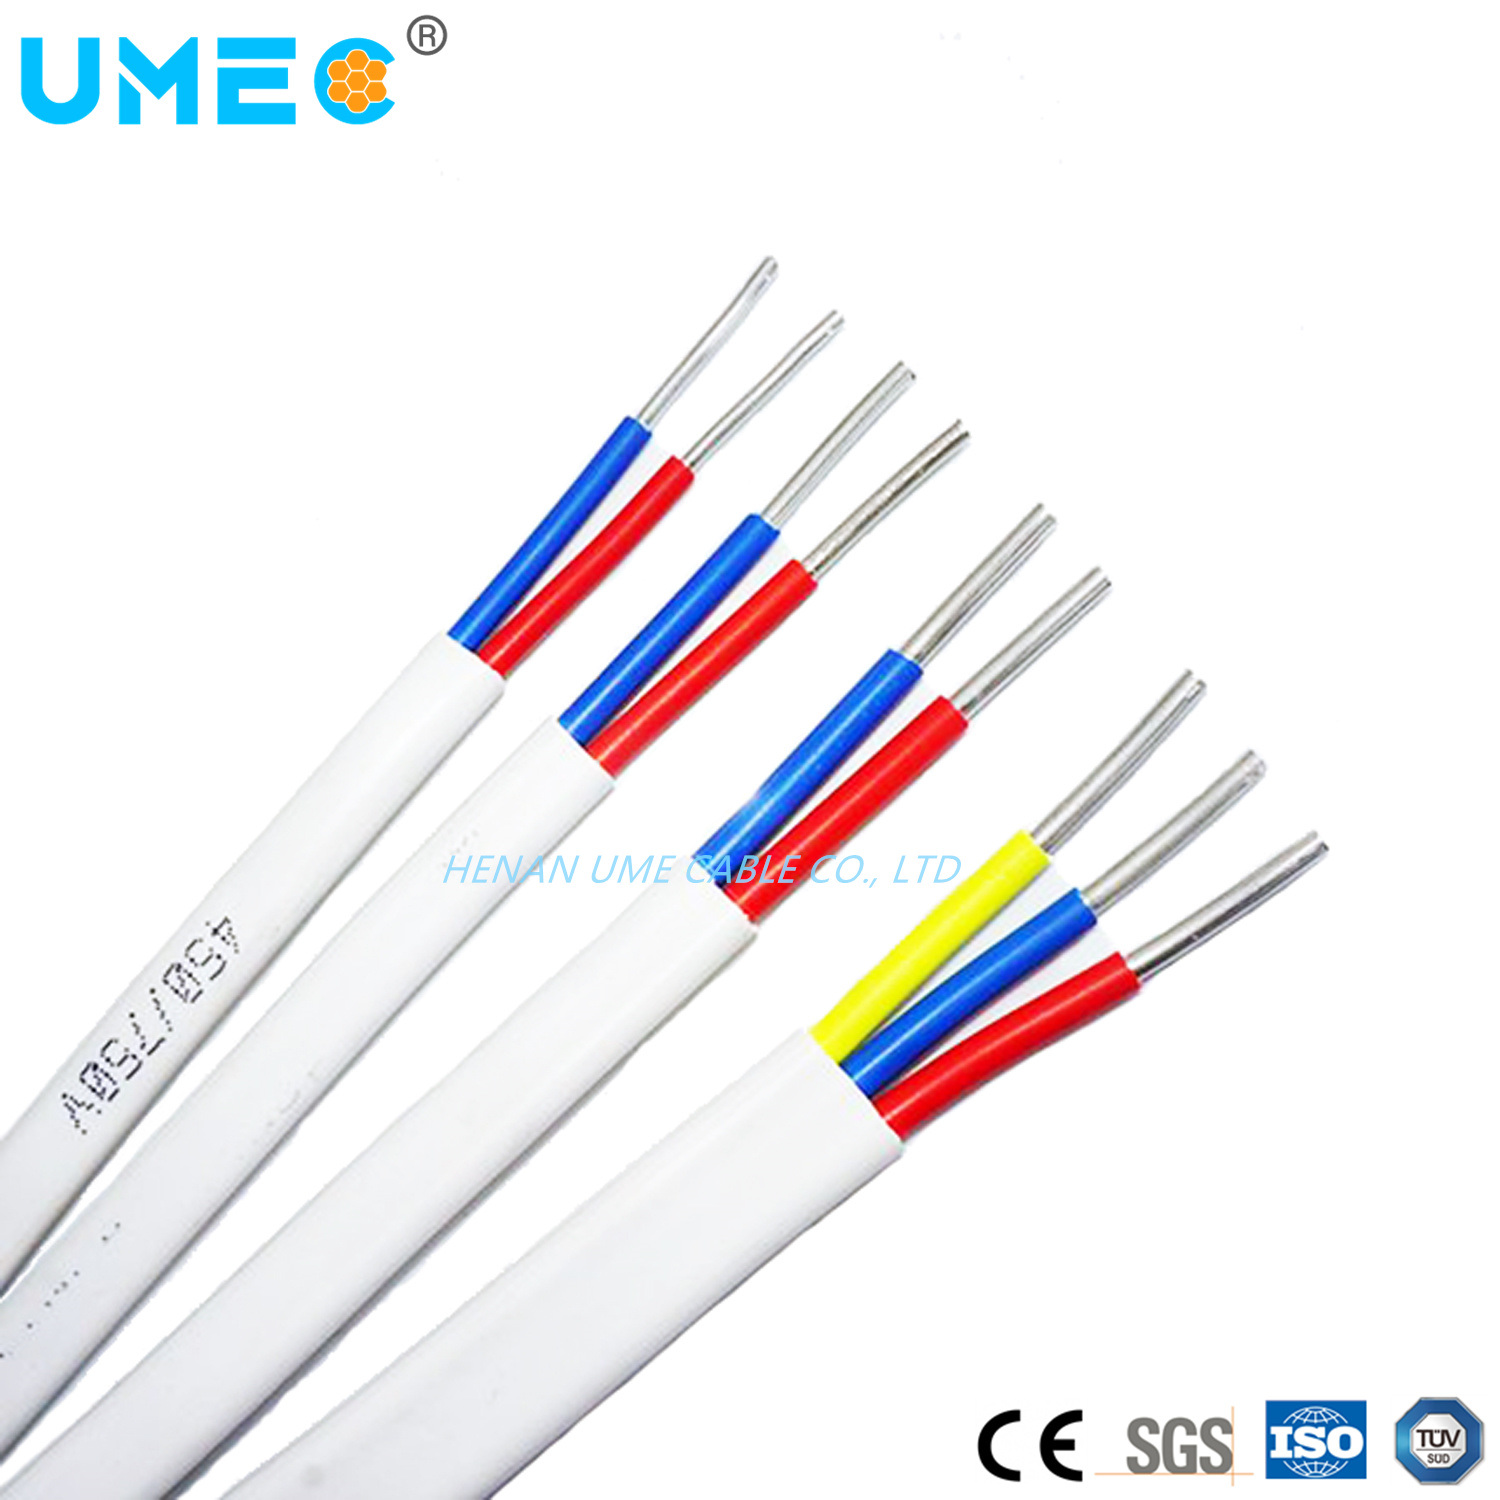 Twin PVC Insulated Flat Copper Electric Wire Cable BVVB PVC Insulated Sheathed Wire